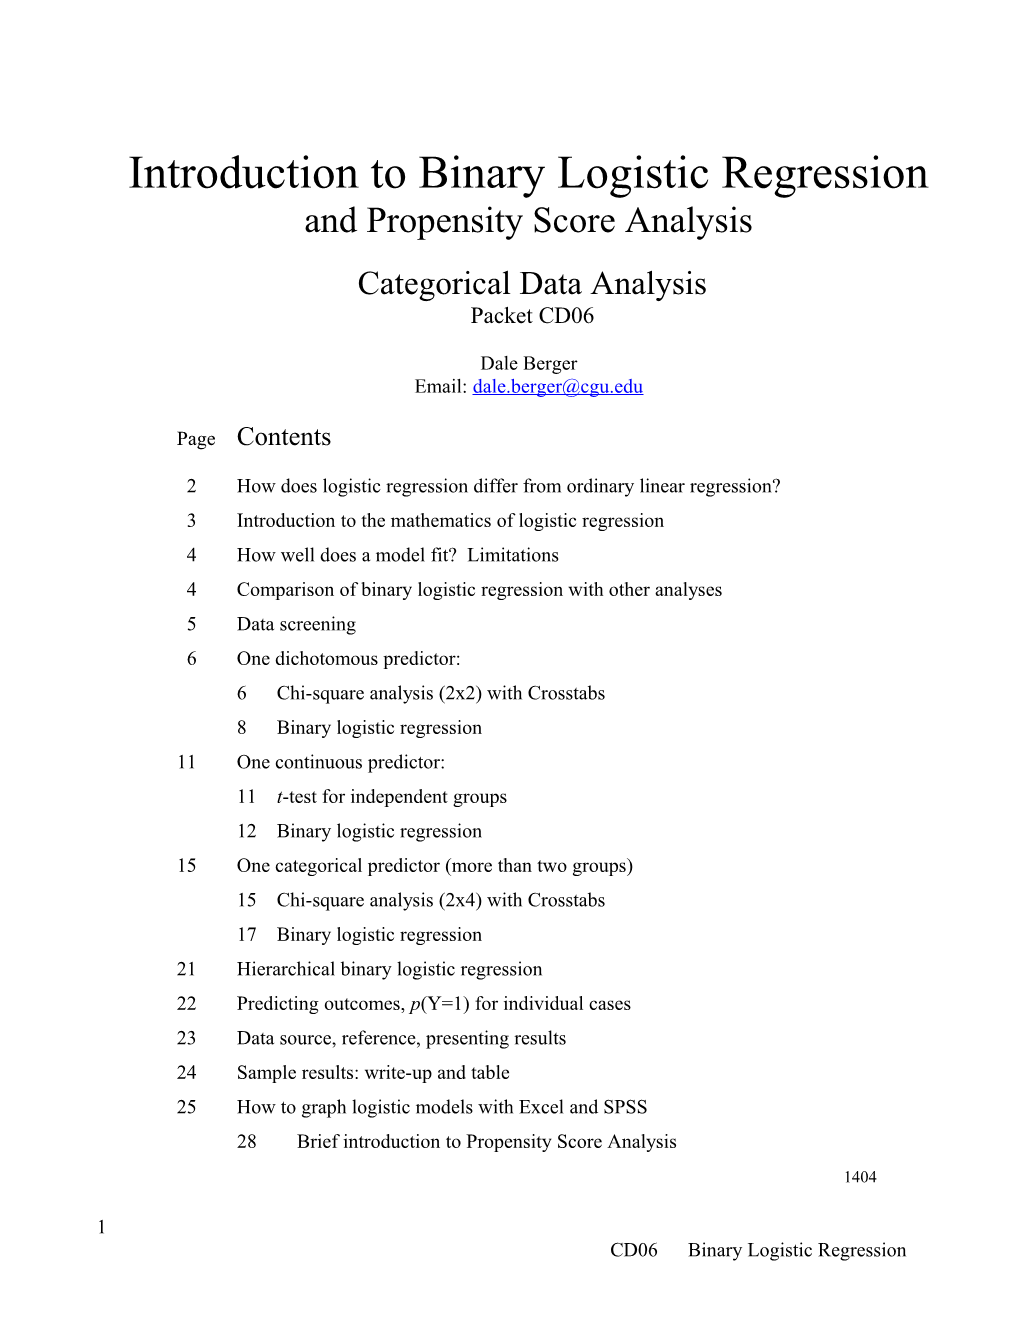 Introduction to Binary Logistic Regression